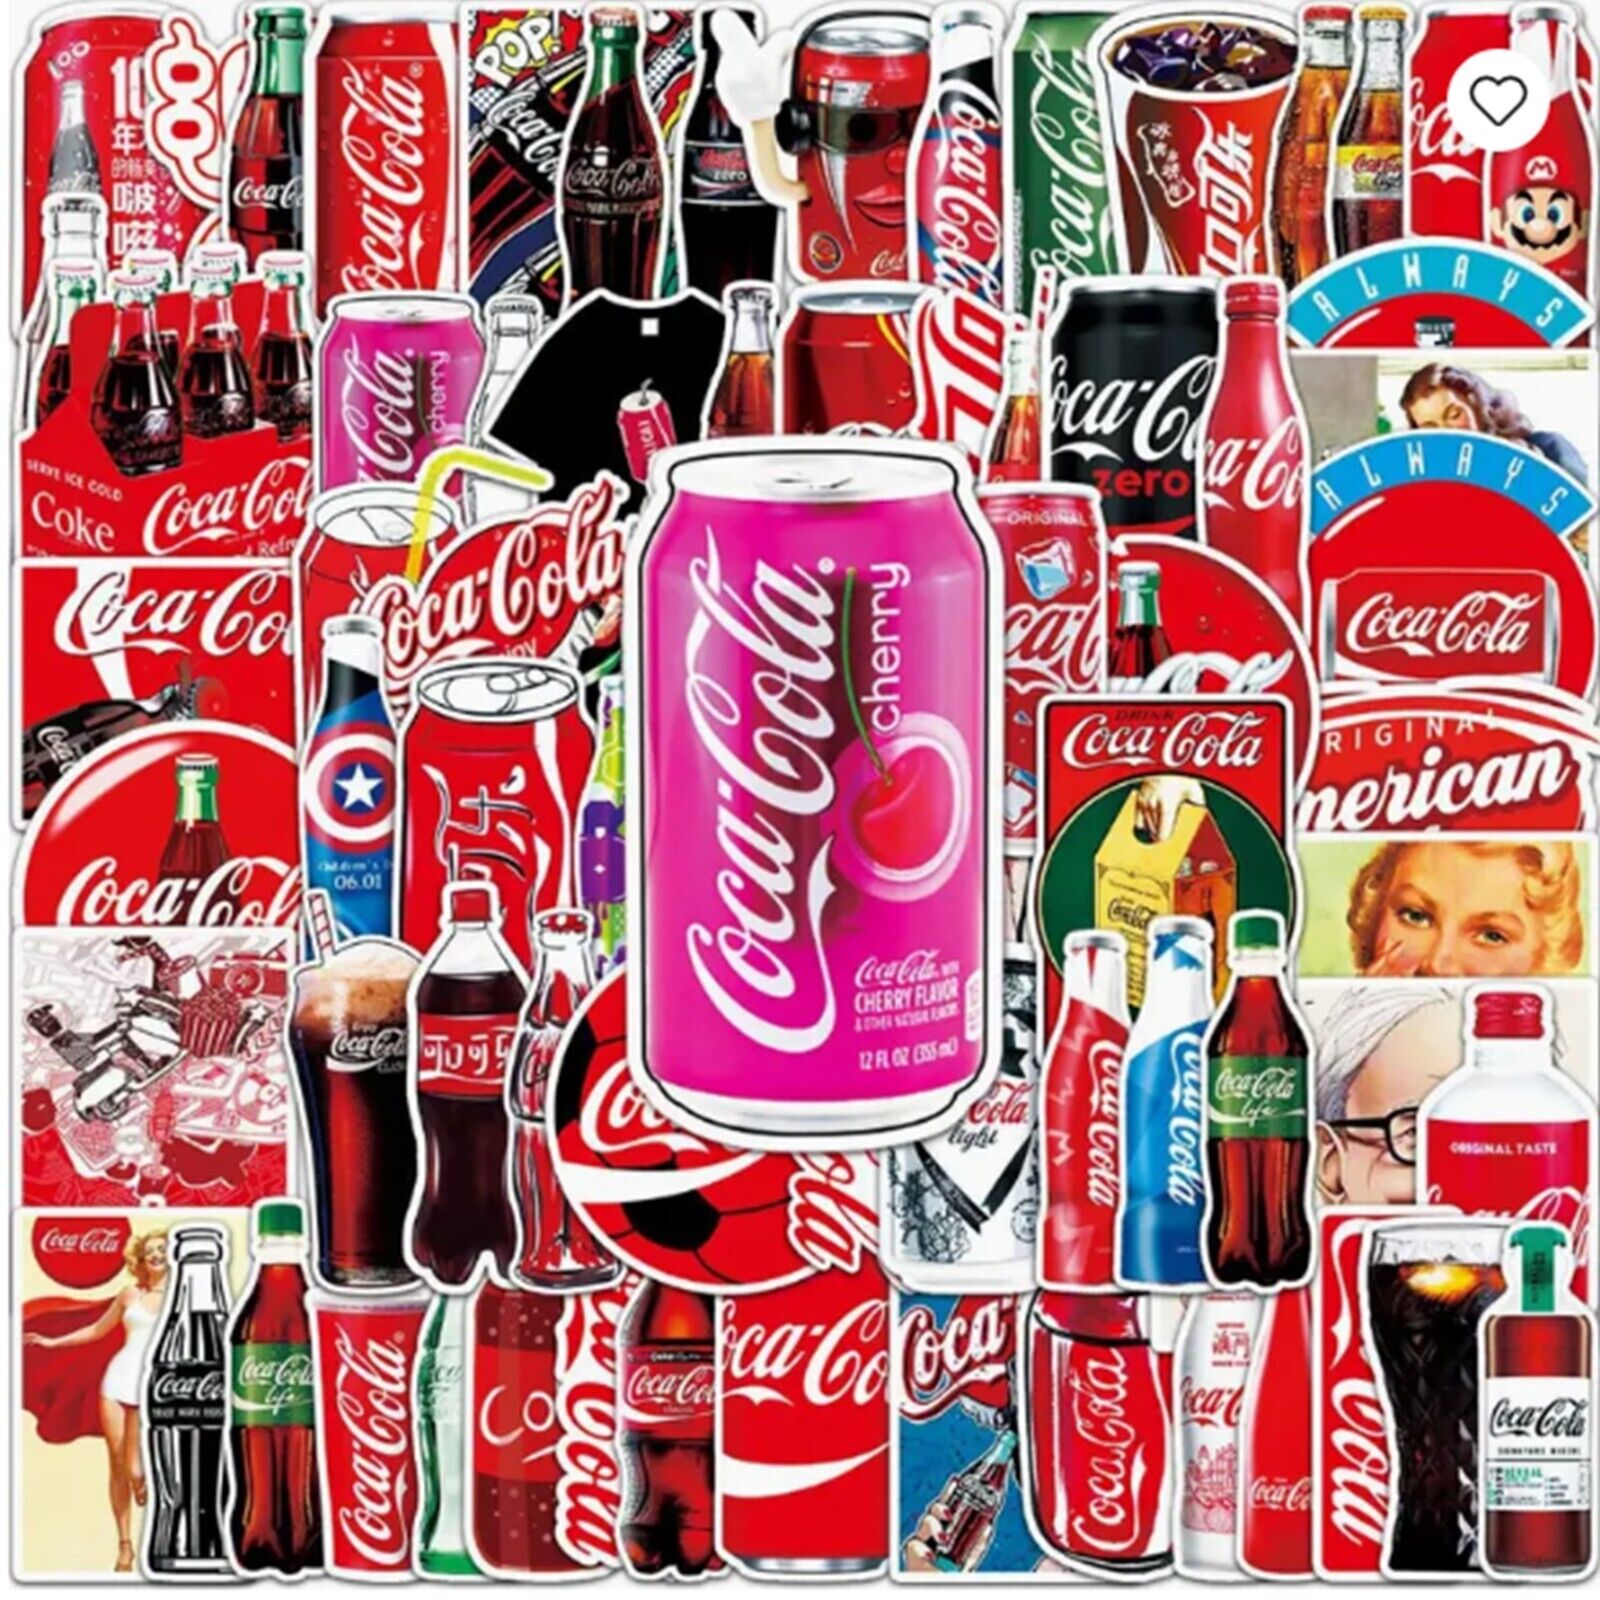 50pc COCA COLA, COKE LOGO MIX STICKERS-The First & Long Time Favorite Since 1886